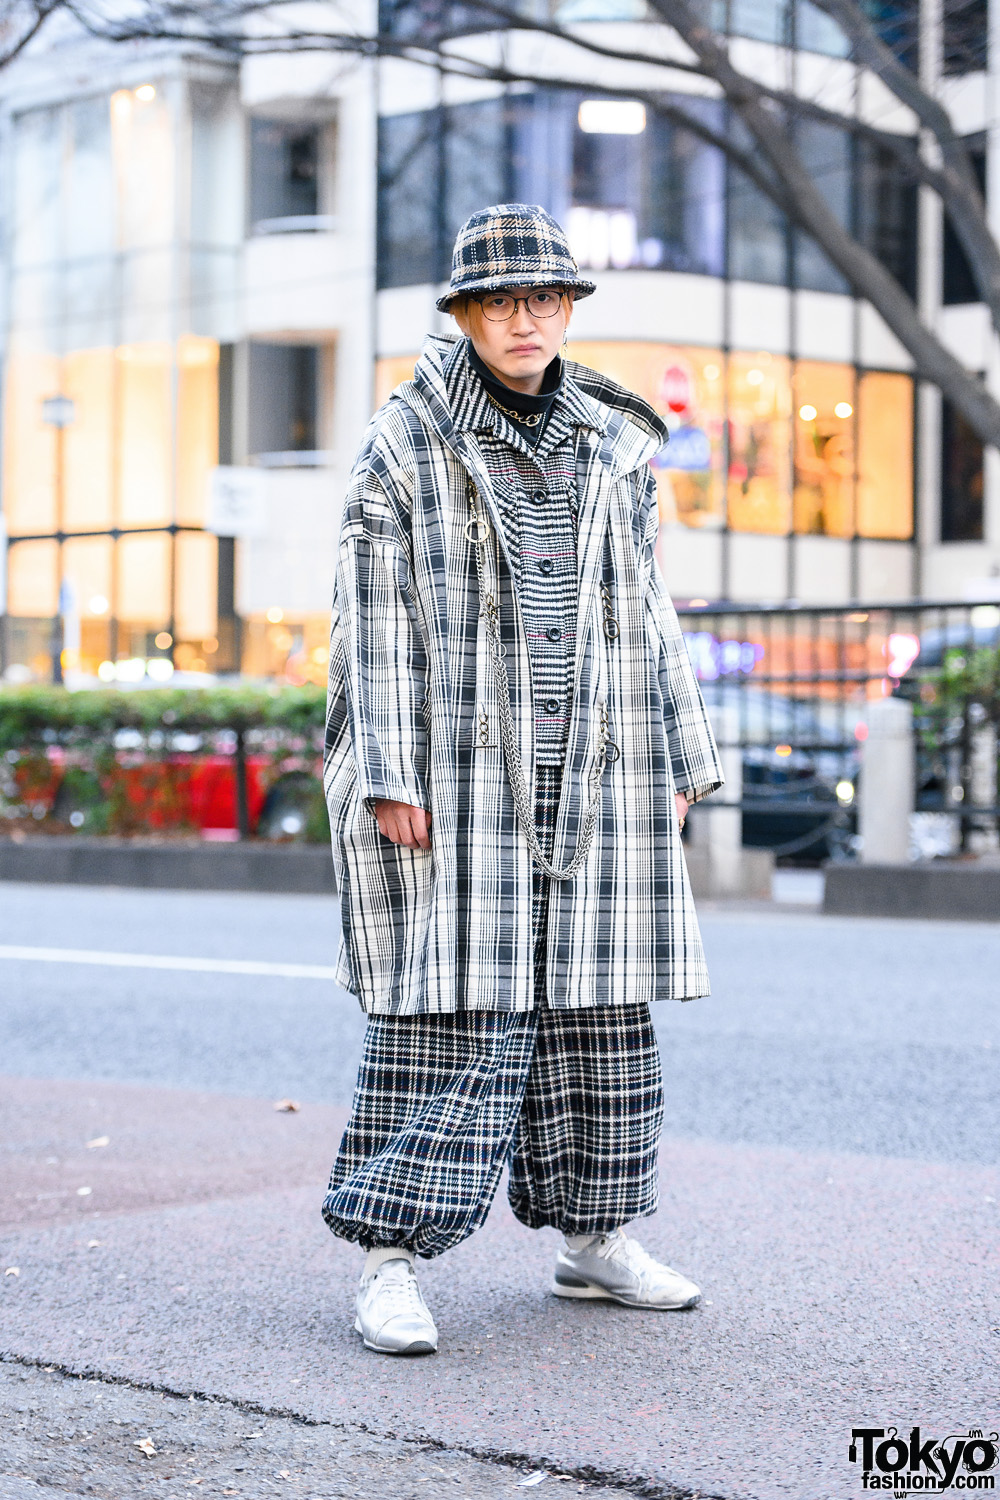 All Over Plaid Tokyo  Style w/ Bucket Hat, Remake Hooded Coat, Ray Cassin Blazer, Turtleneck Top, Handmade Balloon Pants & Silver Sneakers